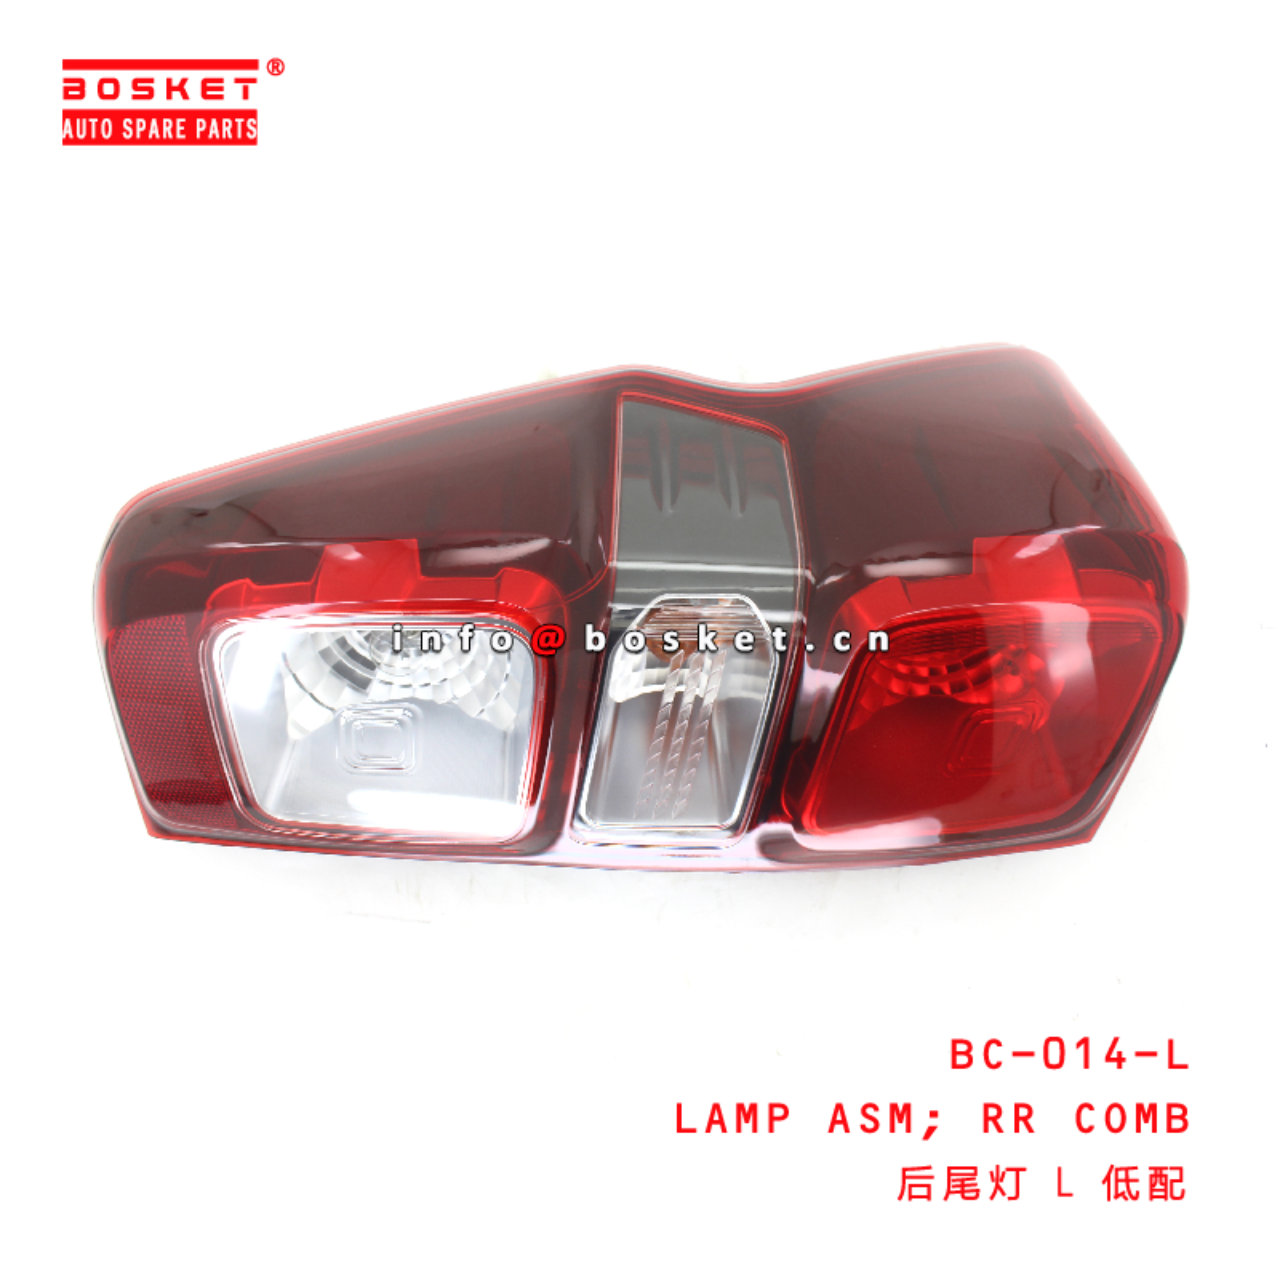 BC-014-L Rear Combination Lamp Assembly suitable for ISUZU DMAX2021  BC-014-L